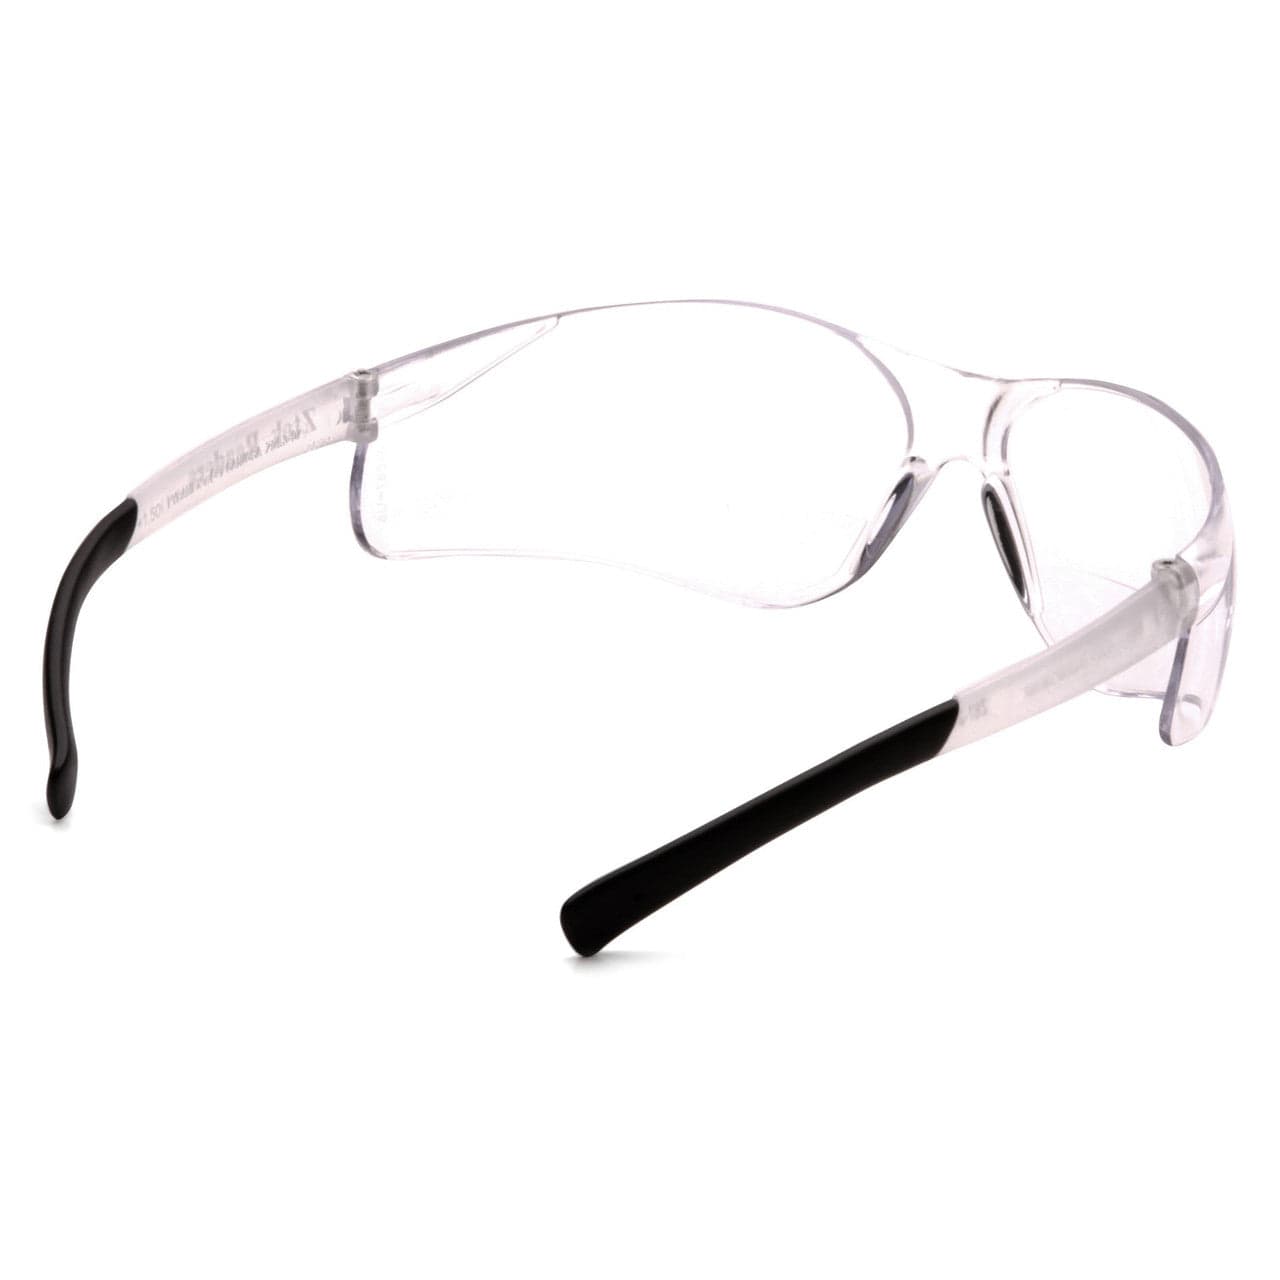 Pyramex Ztek Bifocal Safety Glasses with Clear Lens S2510R Inside View